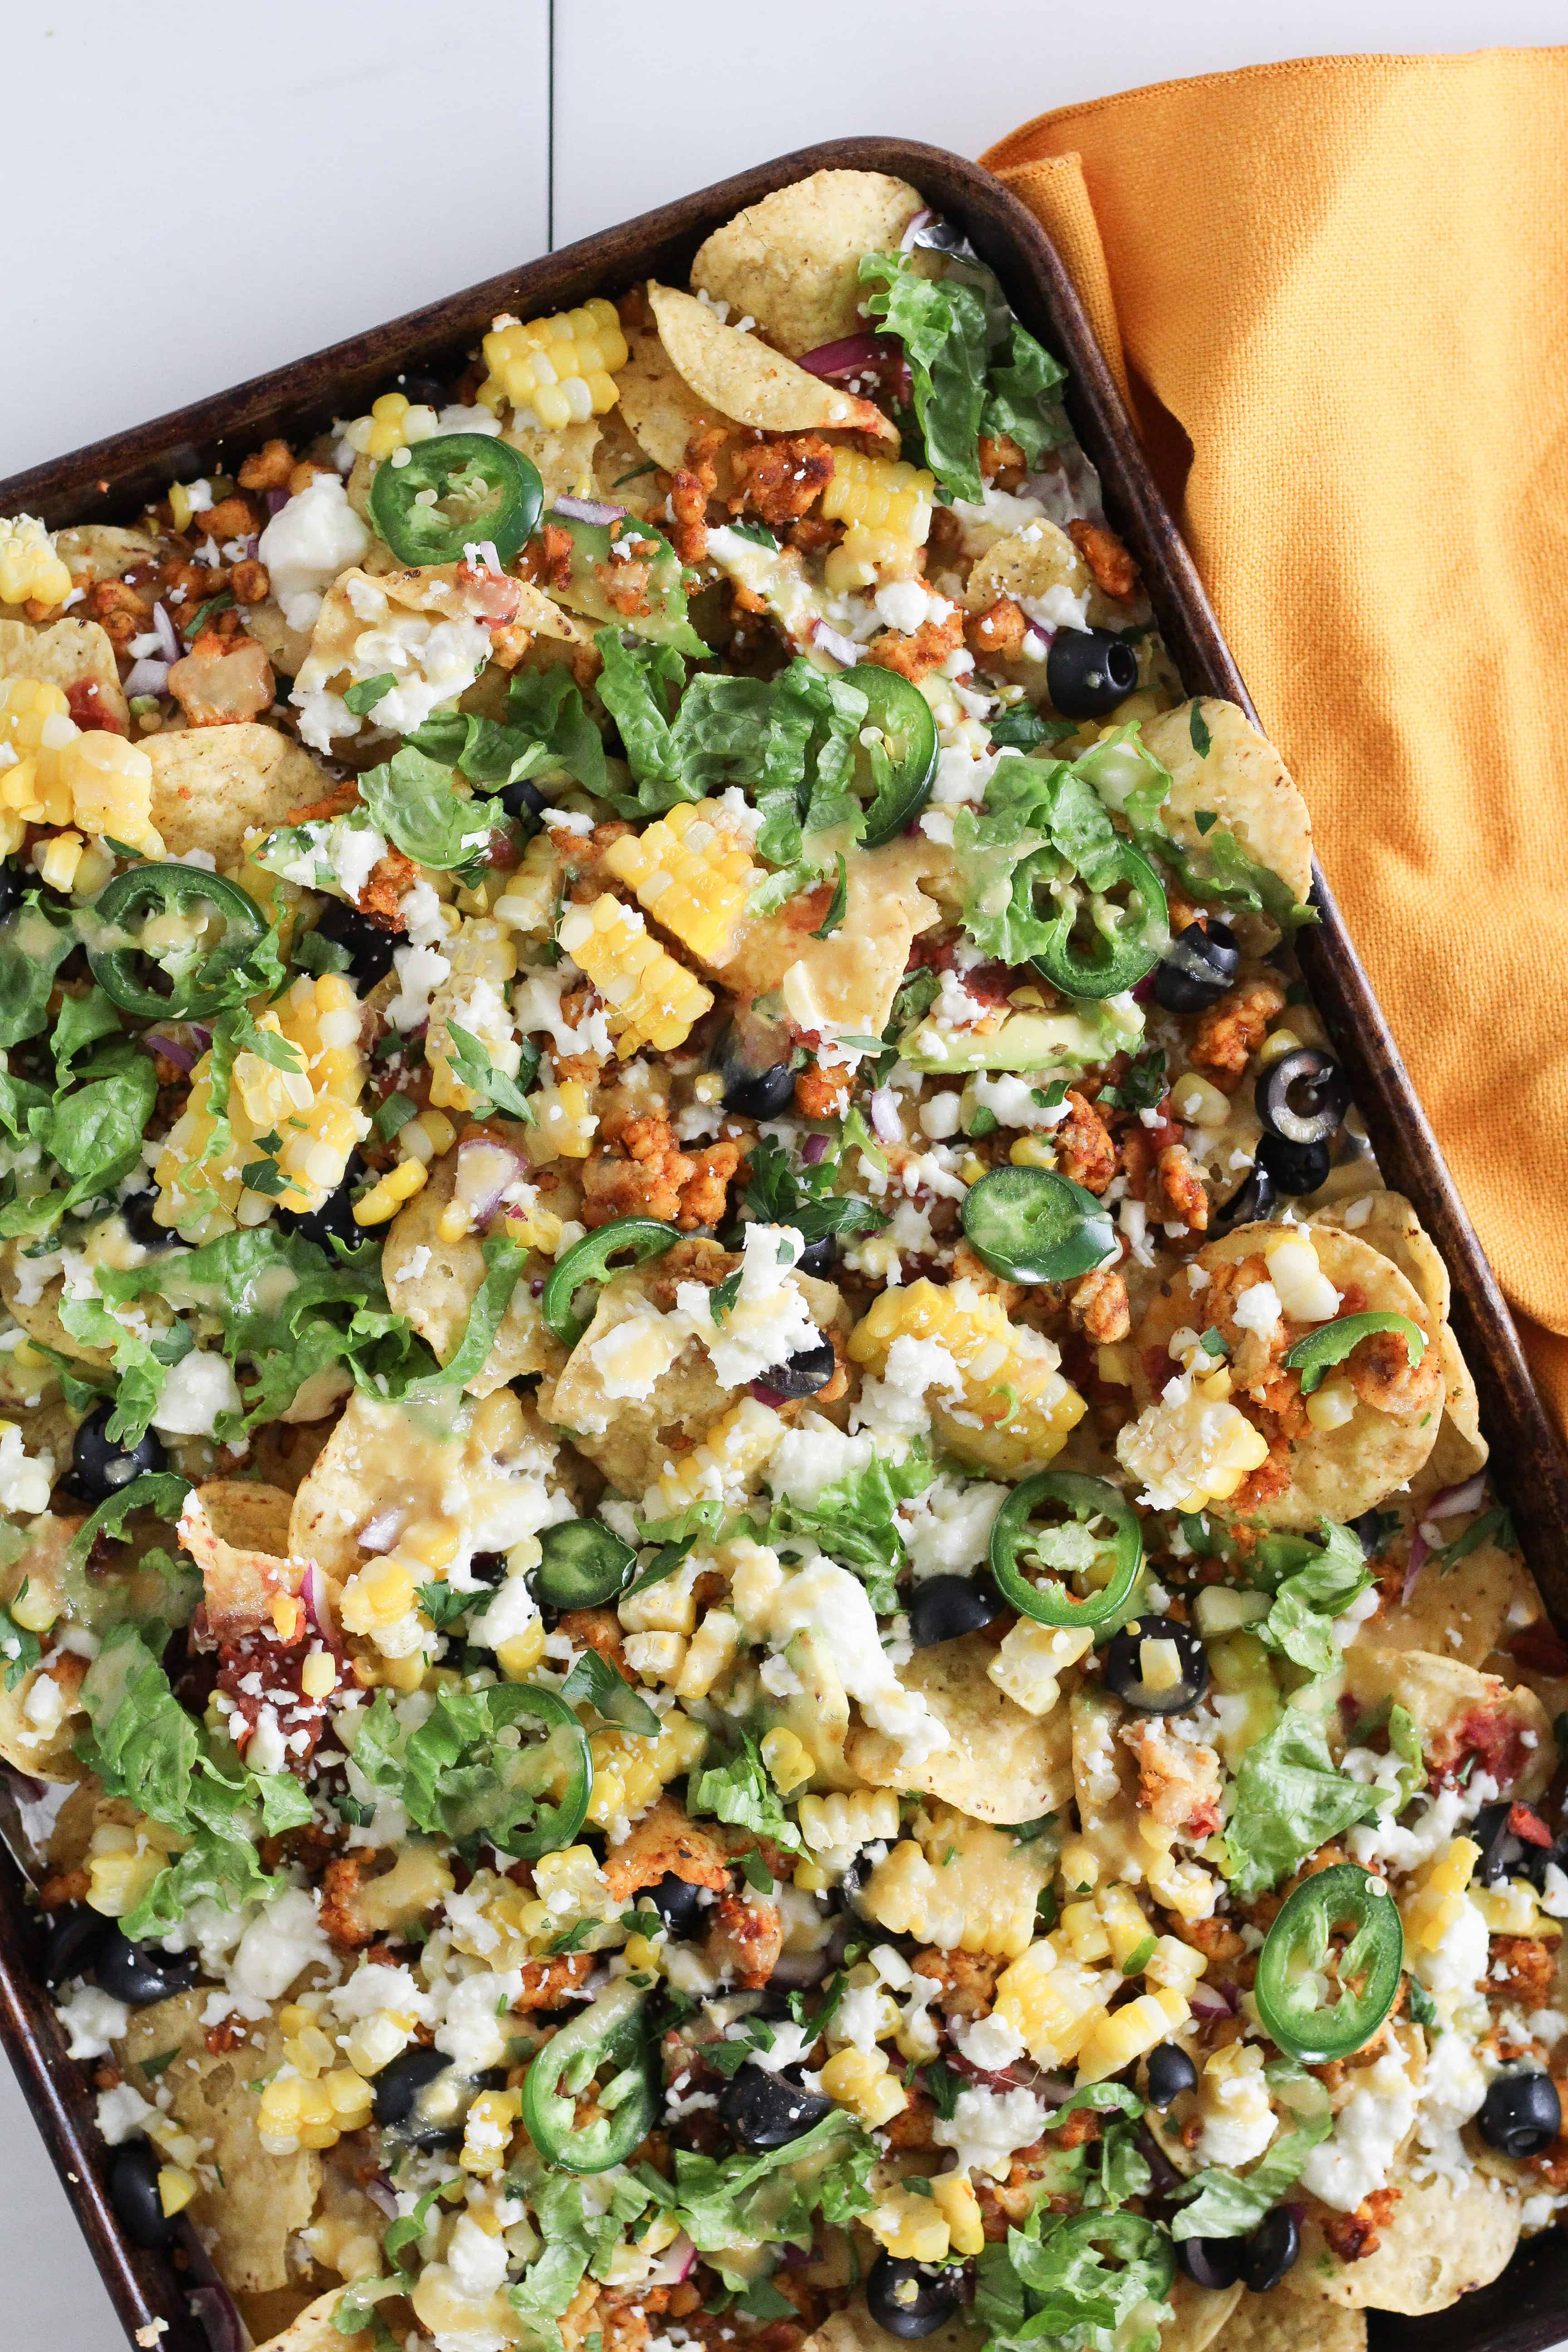 Whether it’s a busy weeknight or a Sunday afternoon tailgate, this recipe for Easy Vegetarian Tempeh Sheet Pan Nachos is quick and easy perfection.